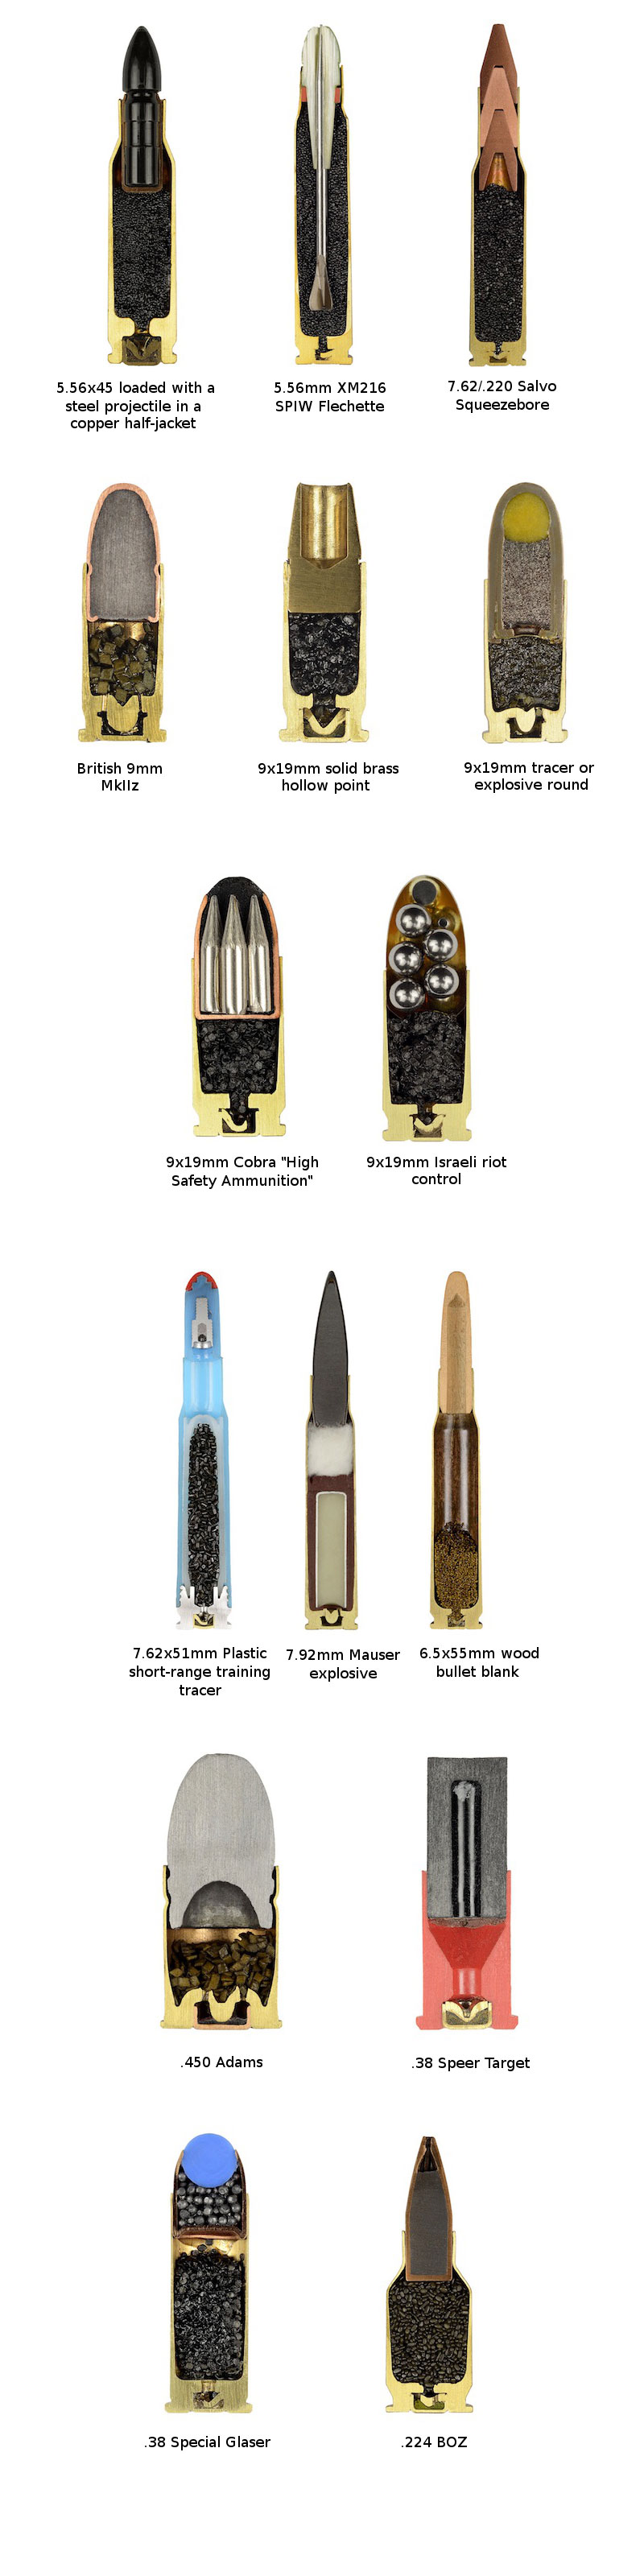 cross-sections-of-ammo-sabine-pearlman-(7)